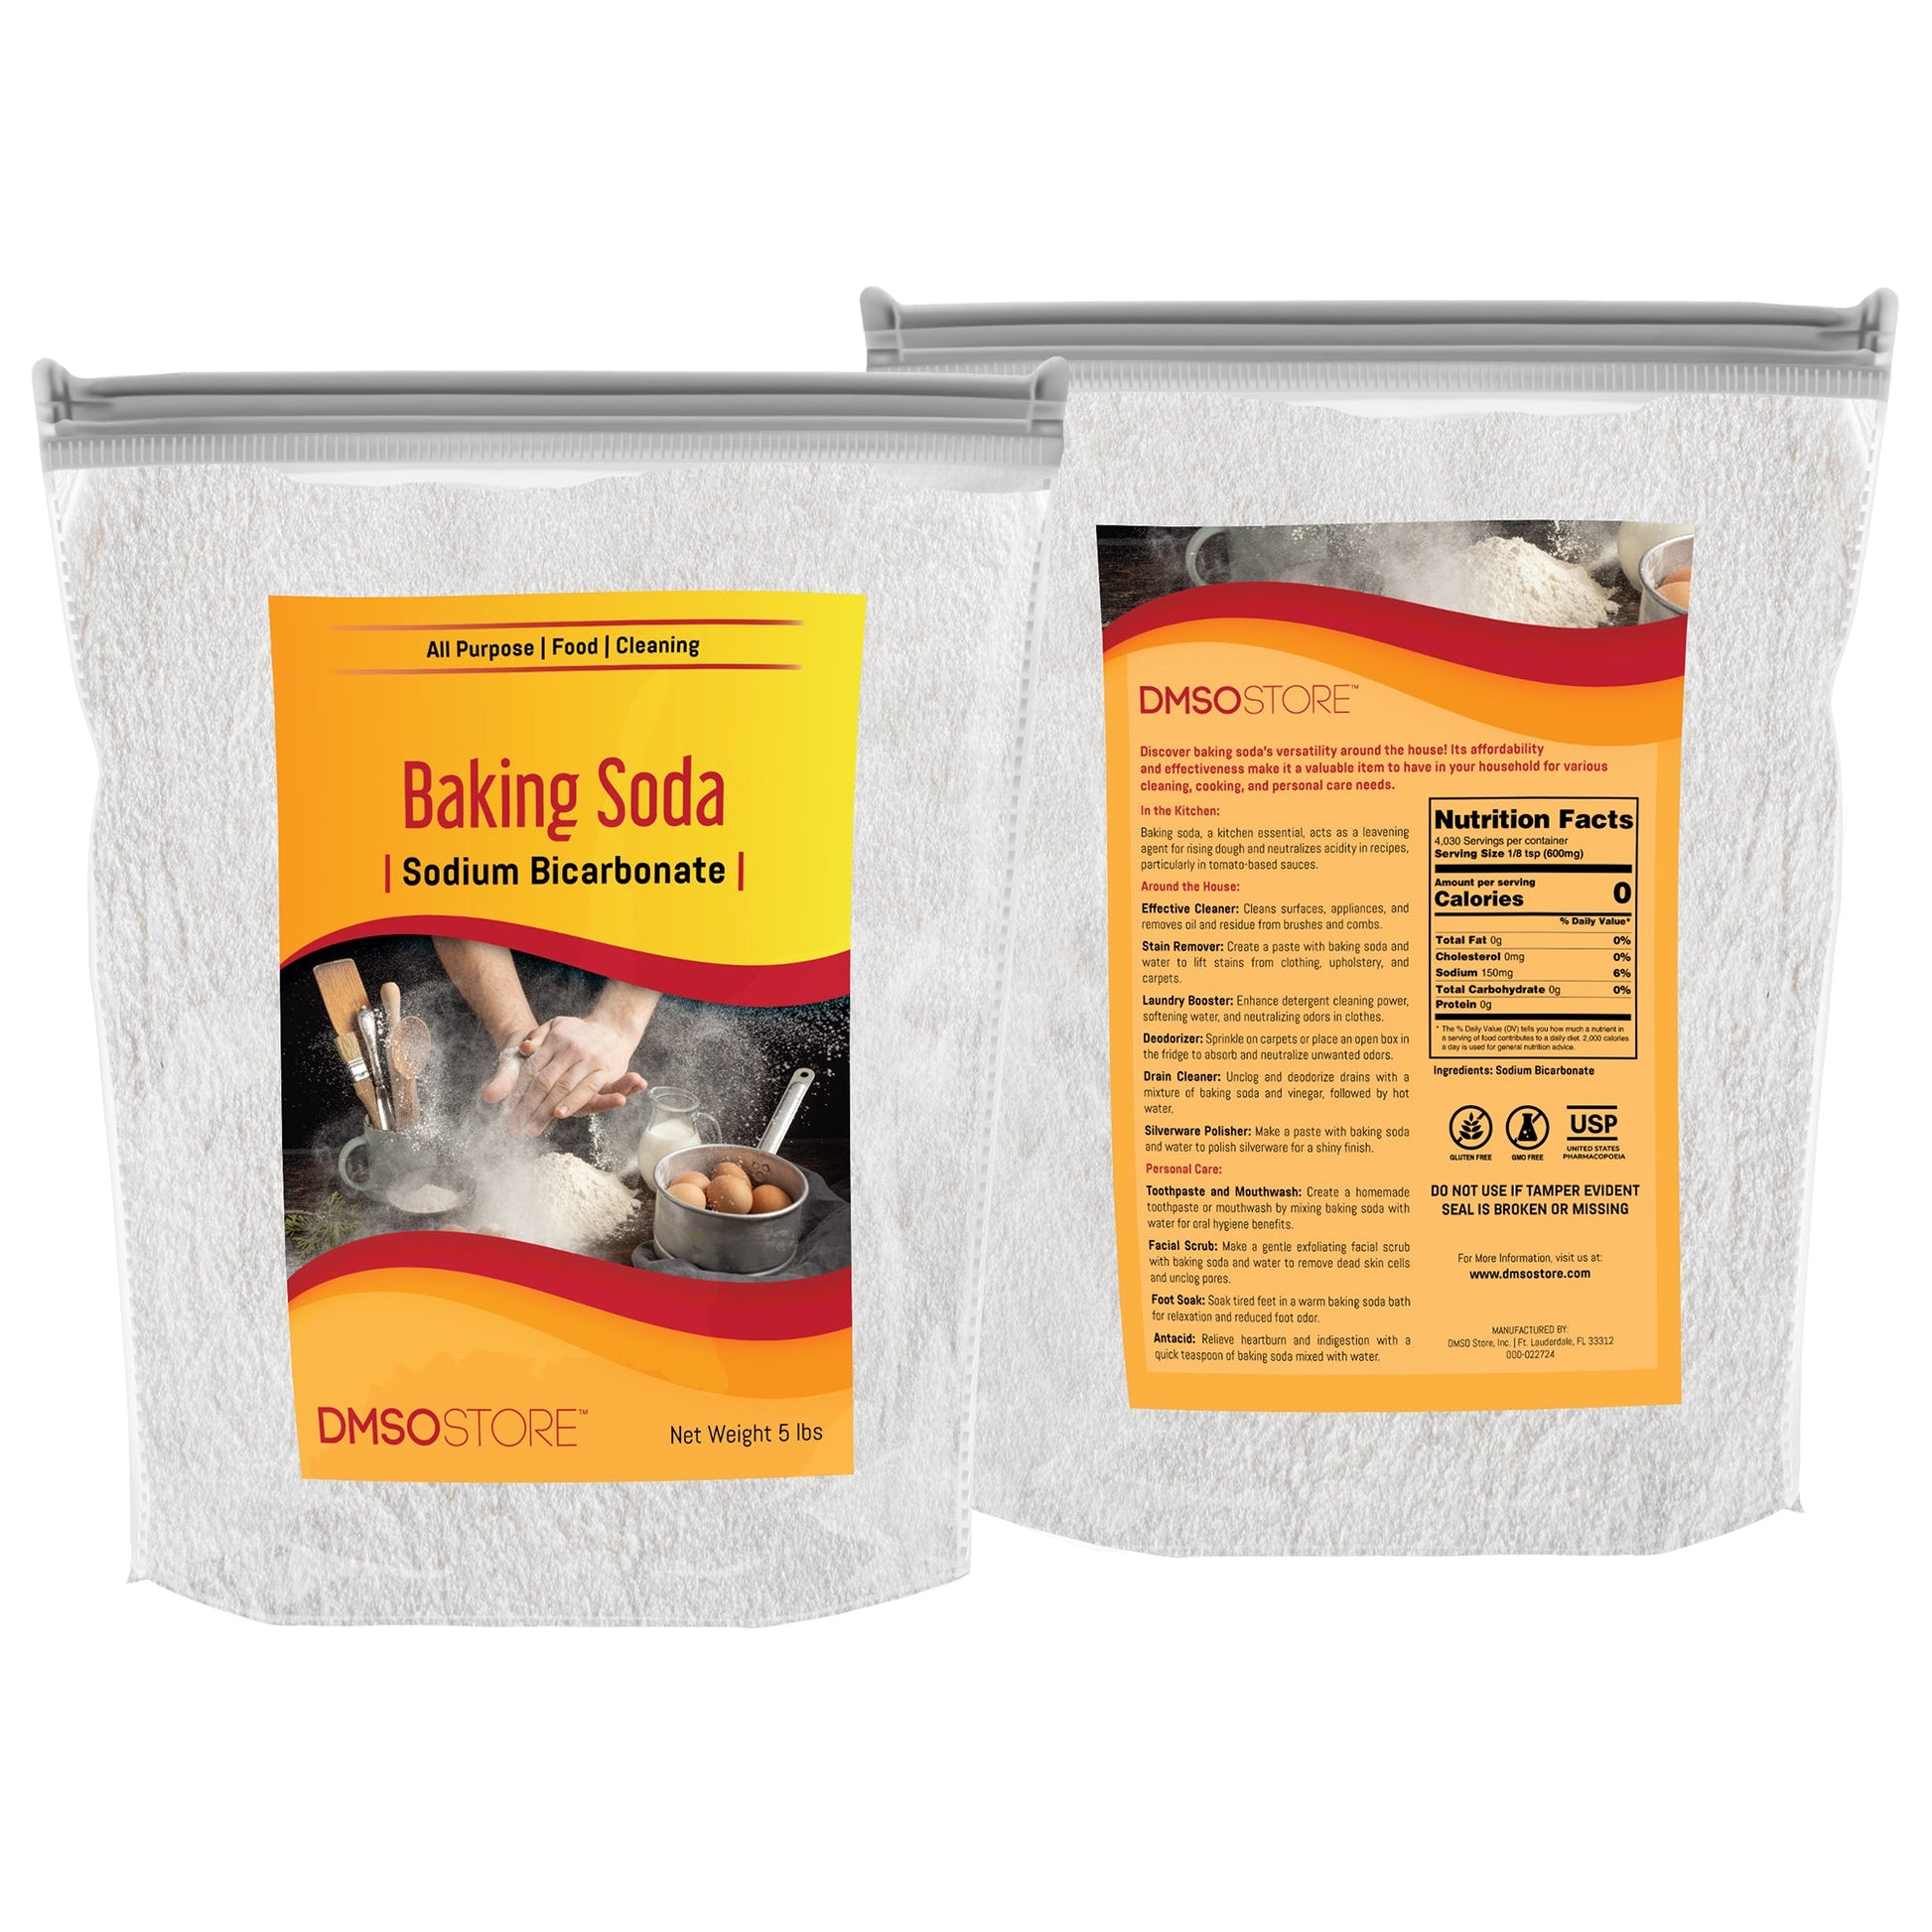 Bag of baking soda showing multiple uses for food, cleaning, labeled with sodium bicarbonate.